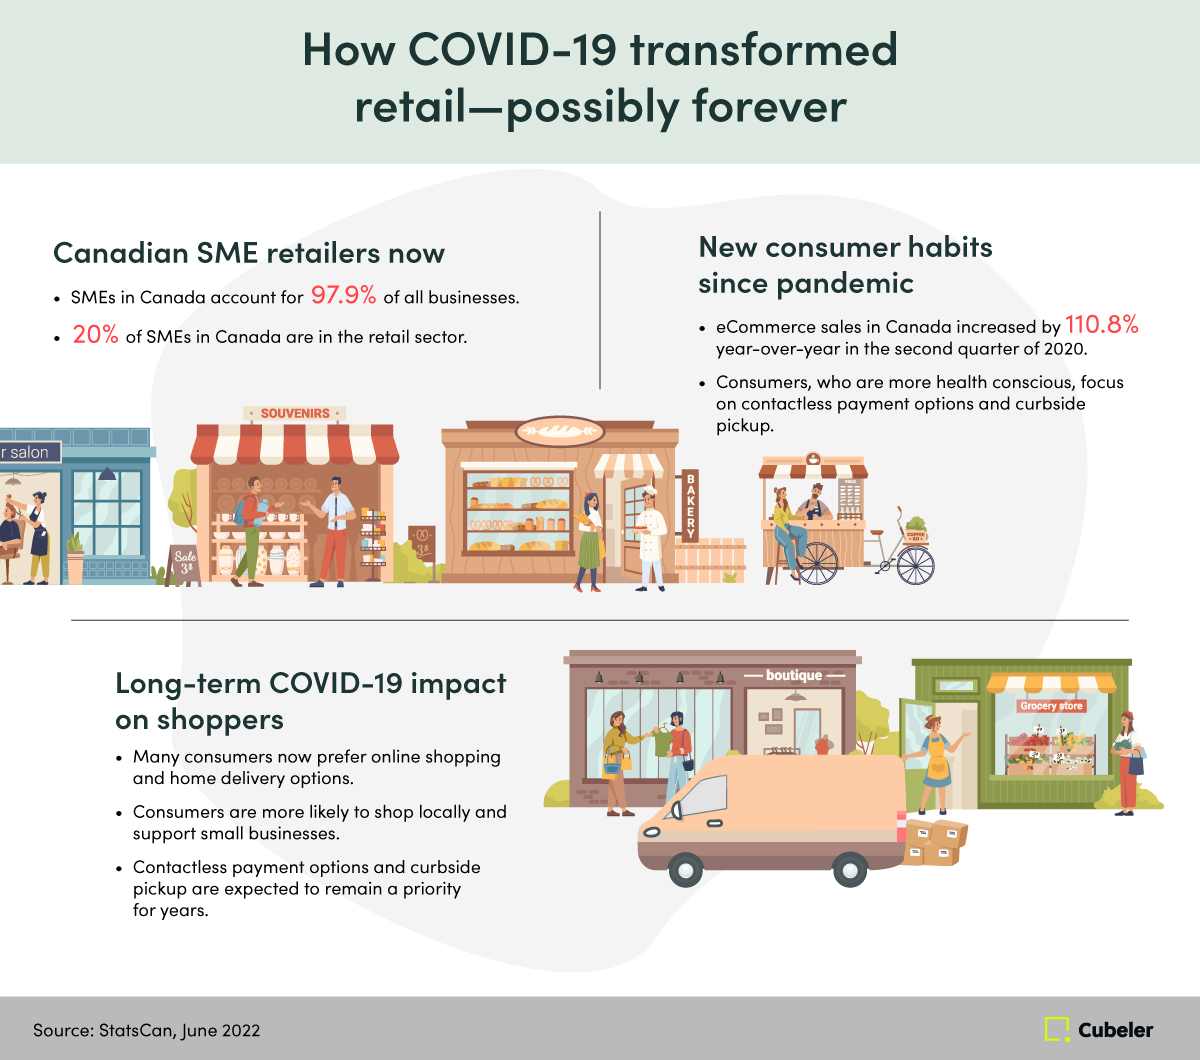 Infographic showing market size of small retailers in Canada, shifts in consumer habits and the long-term impact of the COVID-19 pandemic on shopper behaviour.